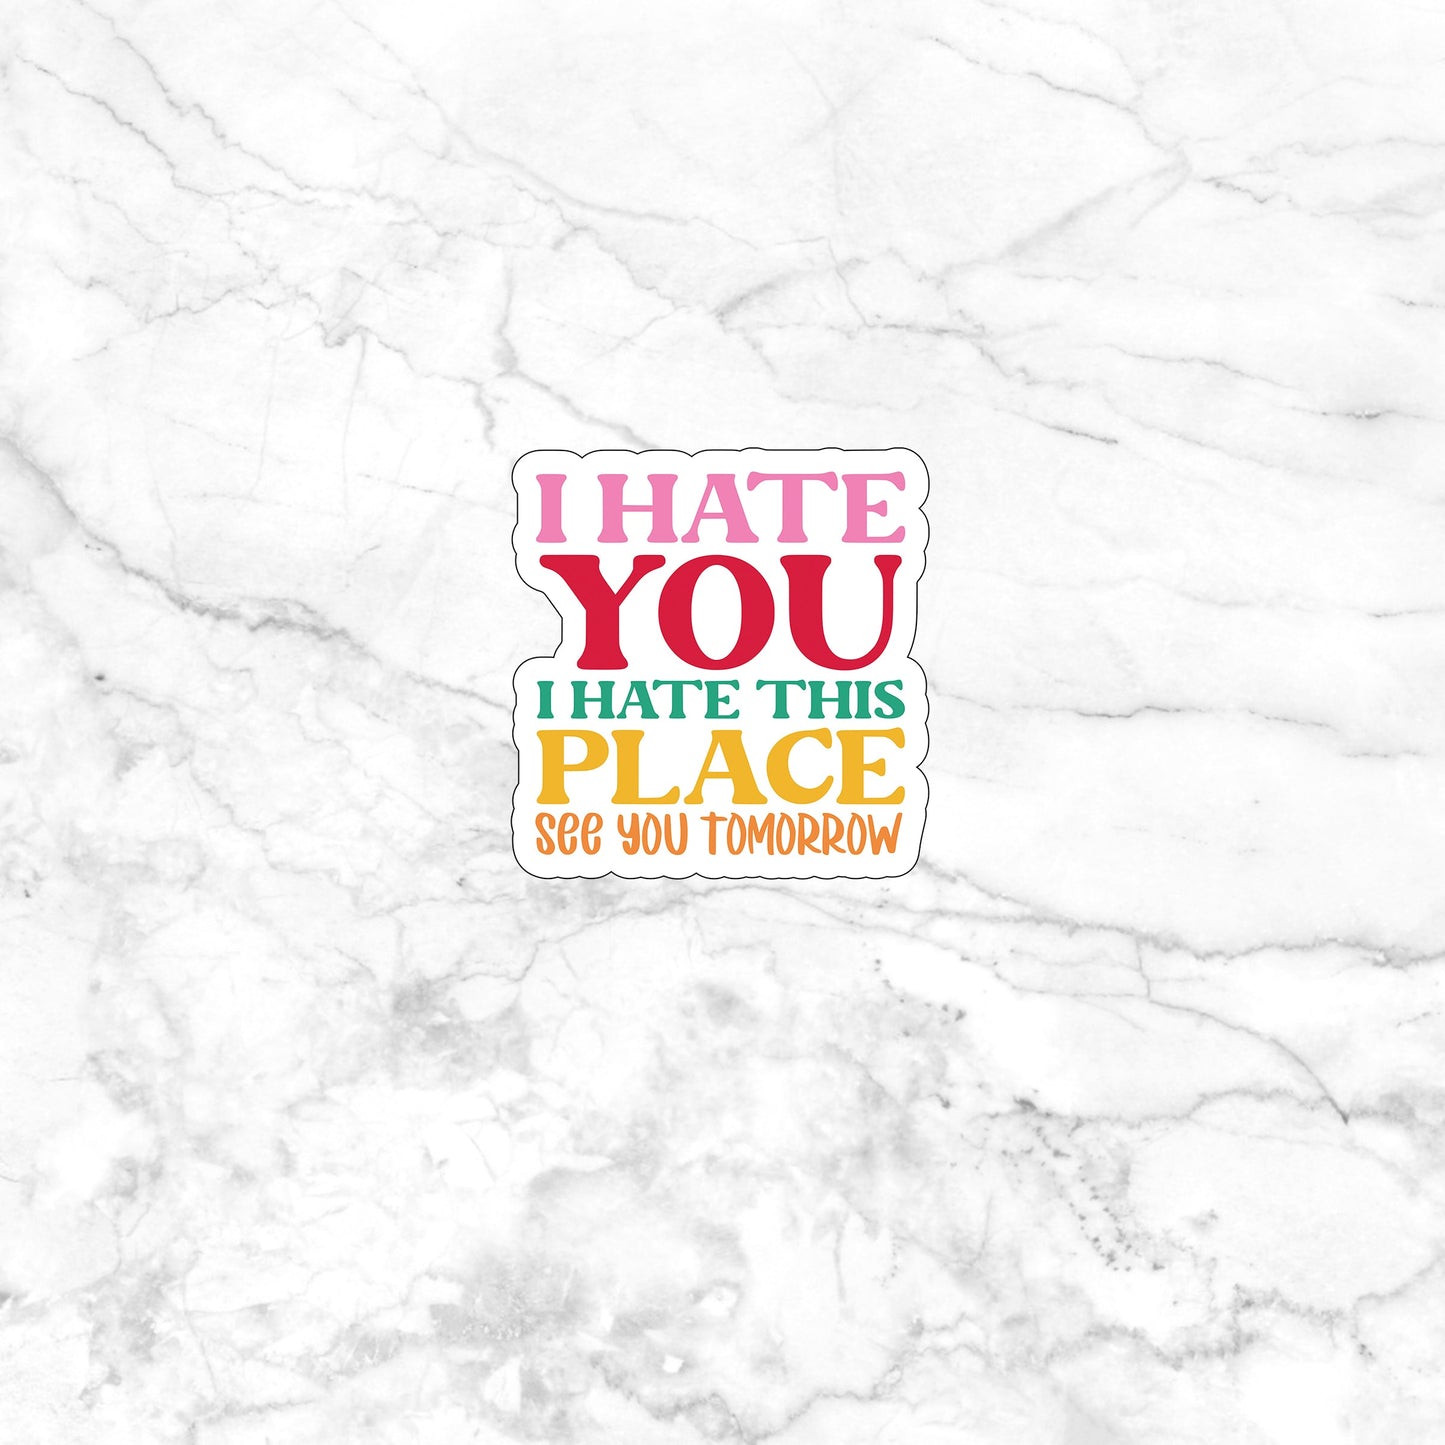 I hate you I hate this place see you tomorrow  Sticker,  Vinyl sticker, laptop sticker, Tablet sticker